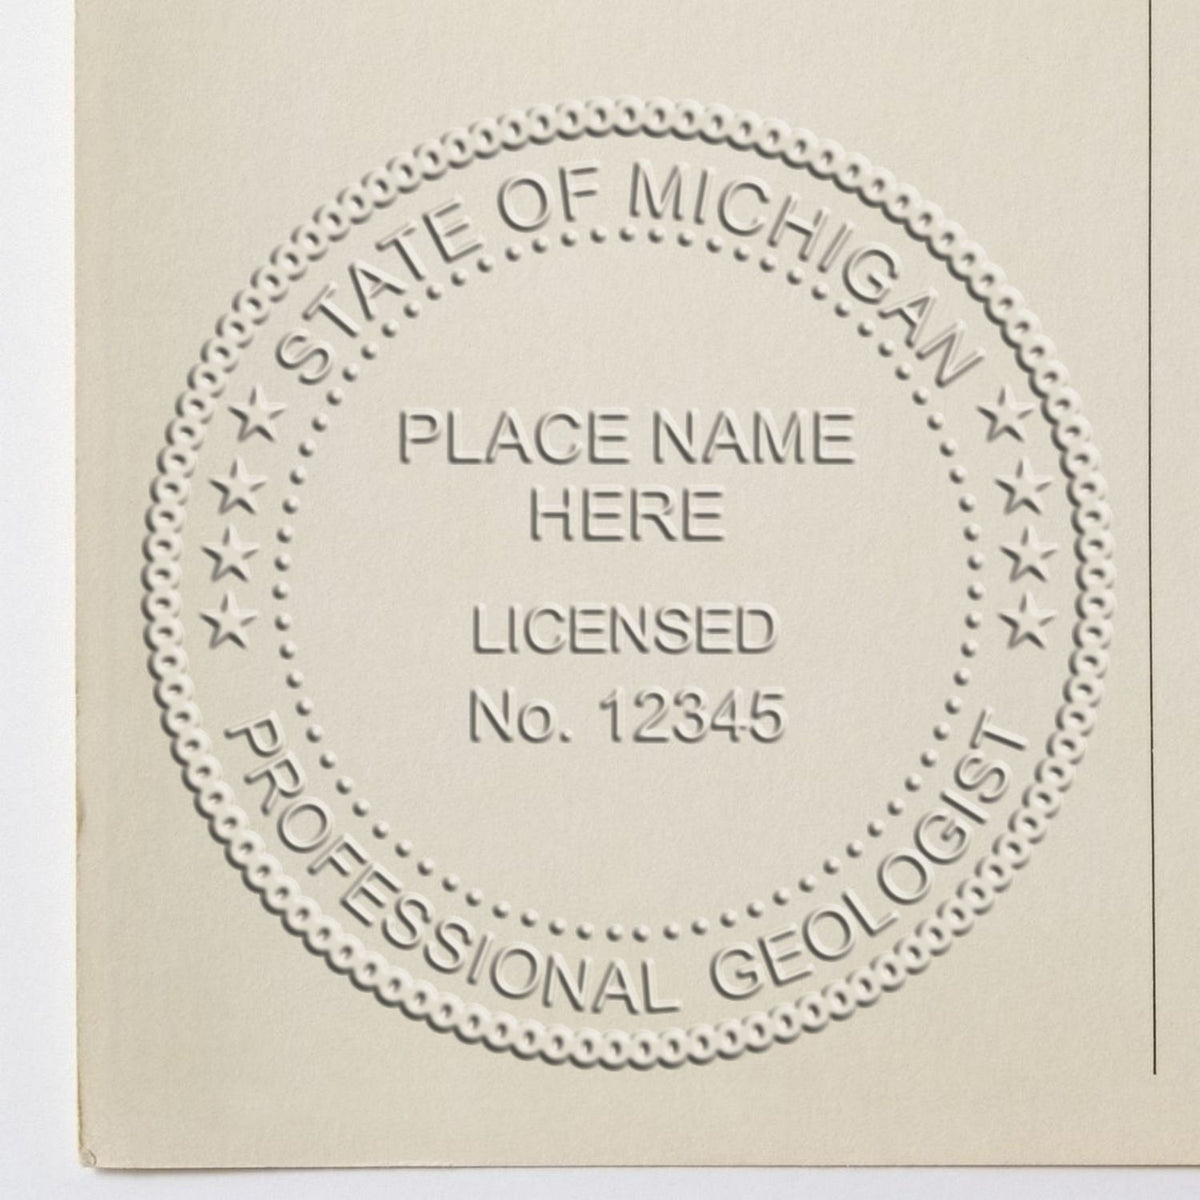 An alternative view of the Soft Michigan Professional Geologist Seal stamped on a sheet of paper showing the image in use